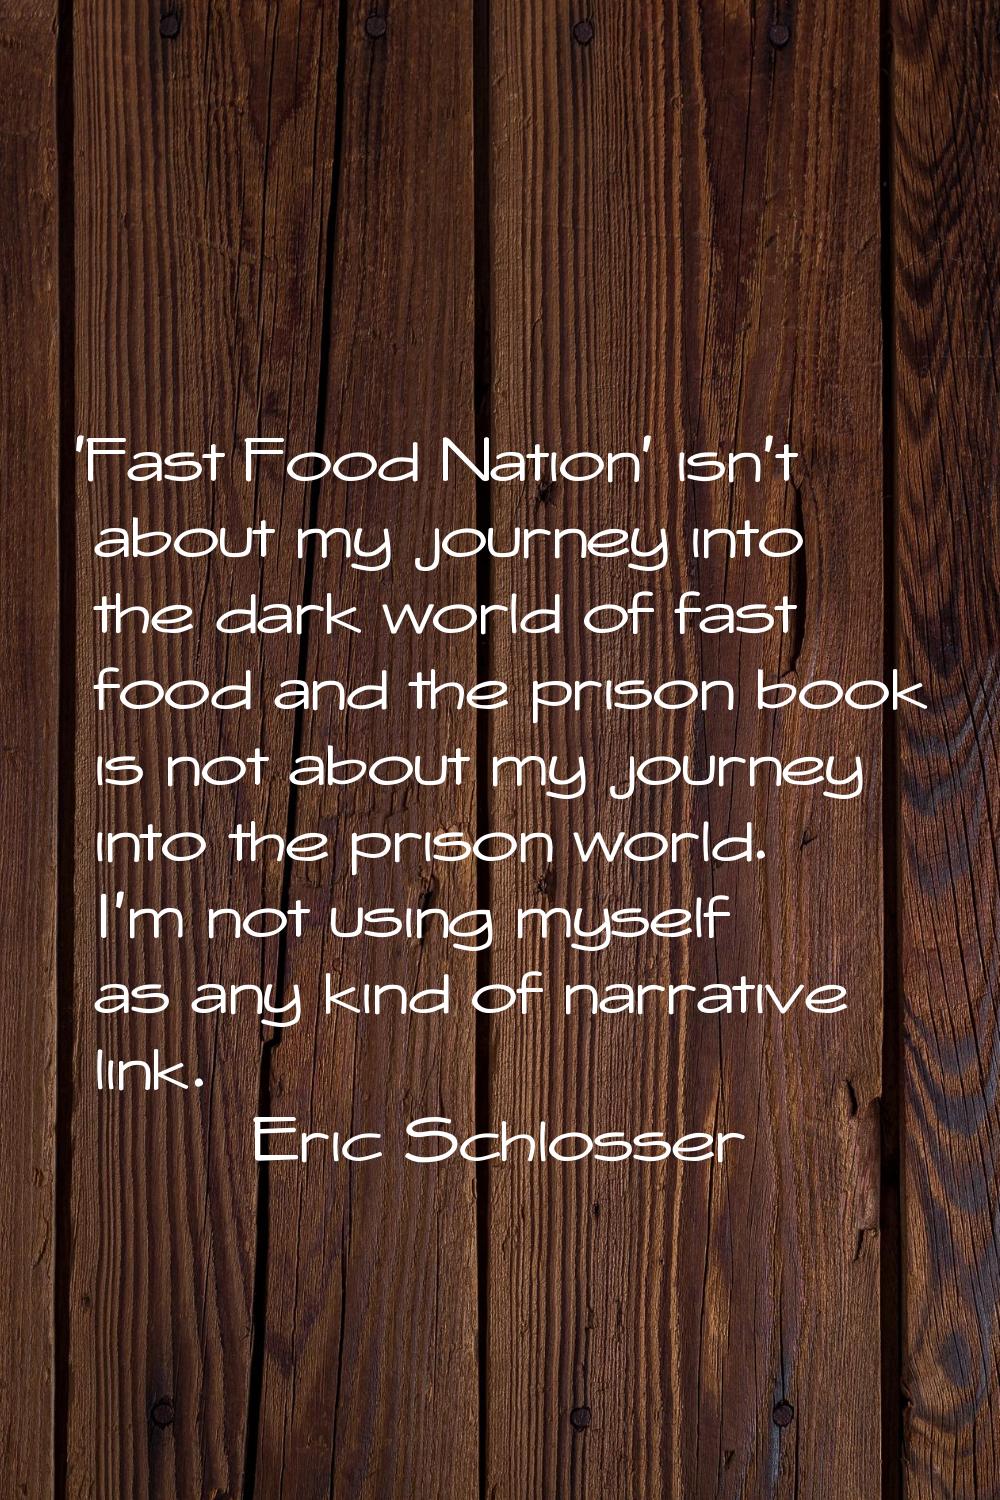 'Fast Food Nation' isn't about my journey into the dark world of fast food and the prison book is n